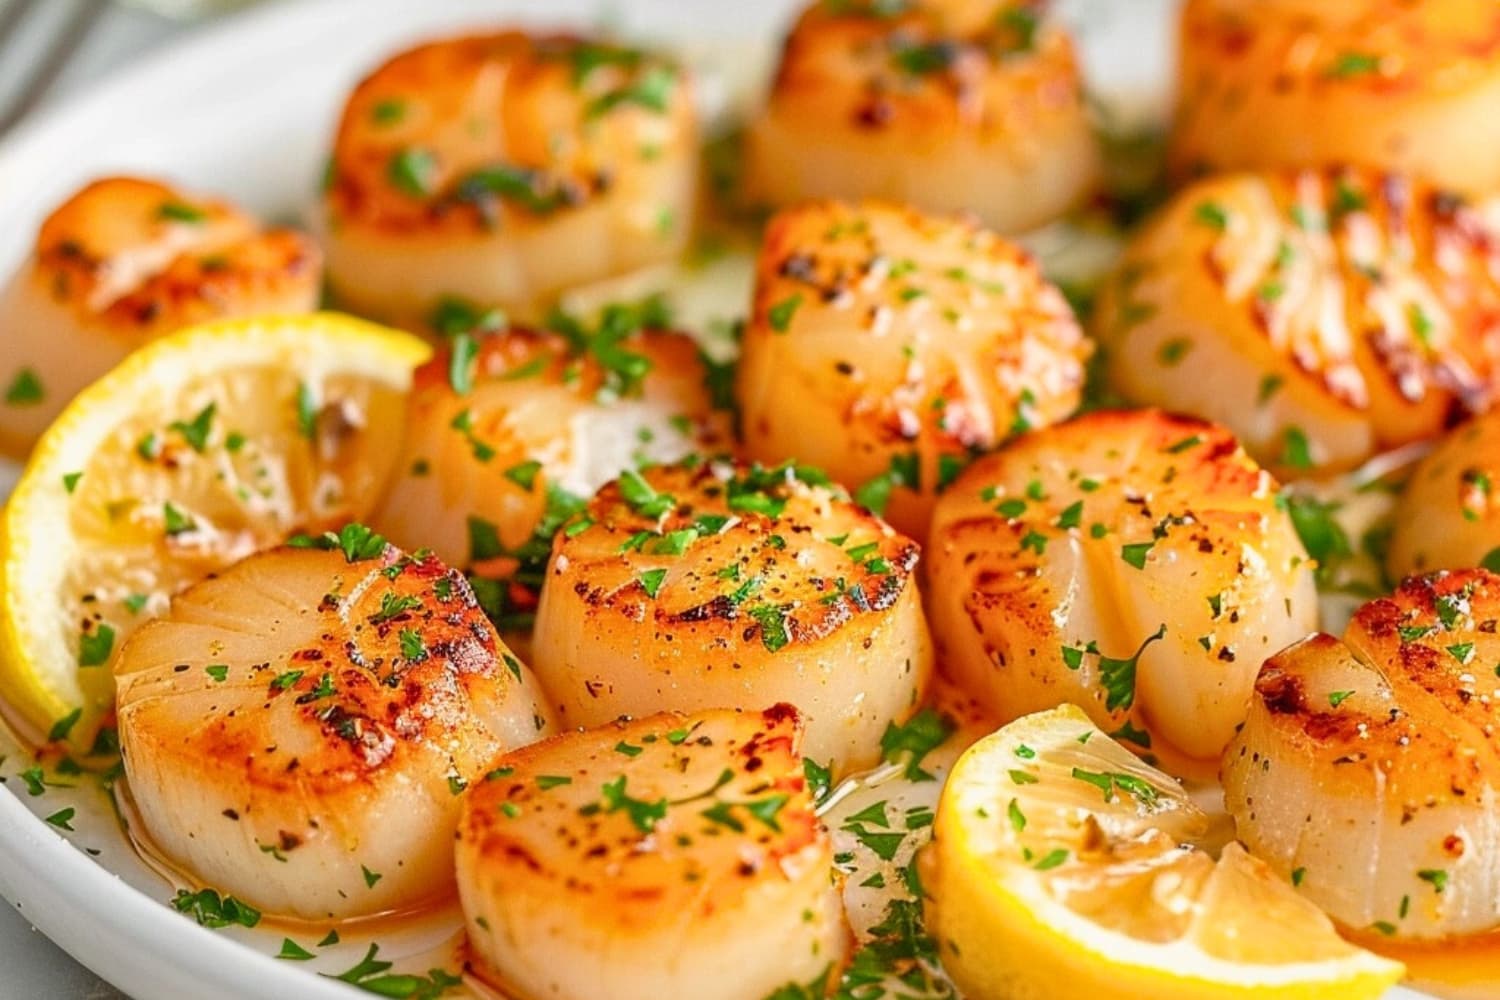 Air fryer scallops tossed in garlic butter sauce served on a white plate.